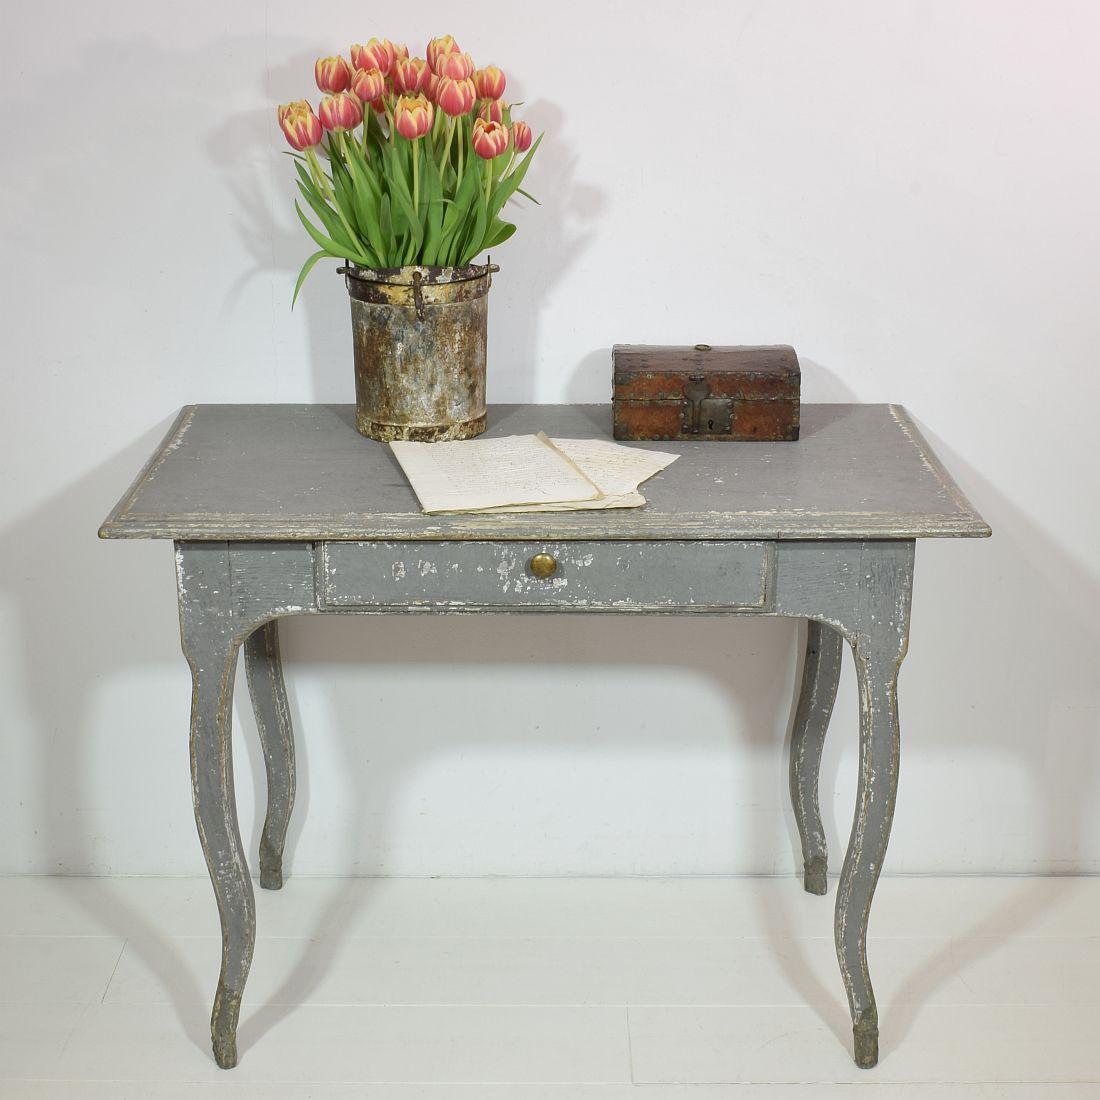 Wonderful small Louis XV table /desk with stunning patina. 
France, 18th century.